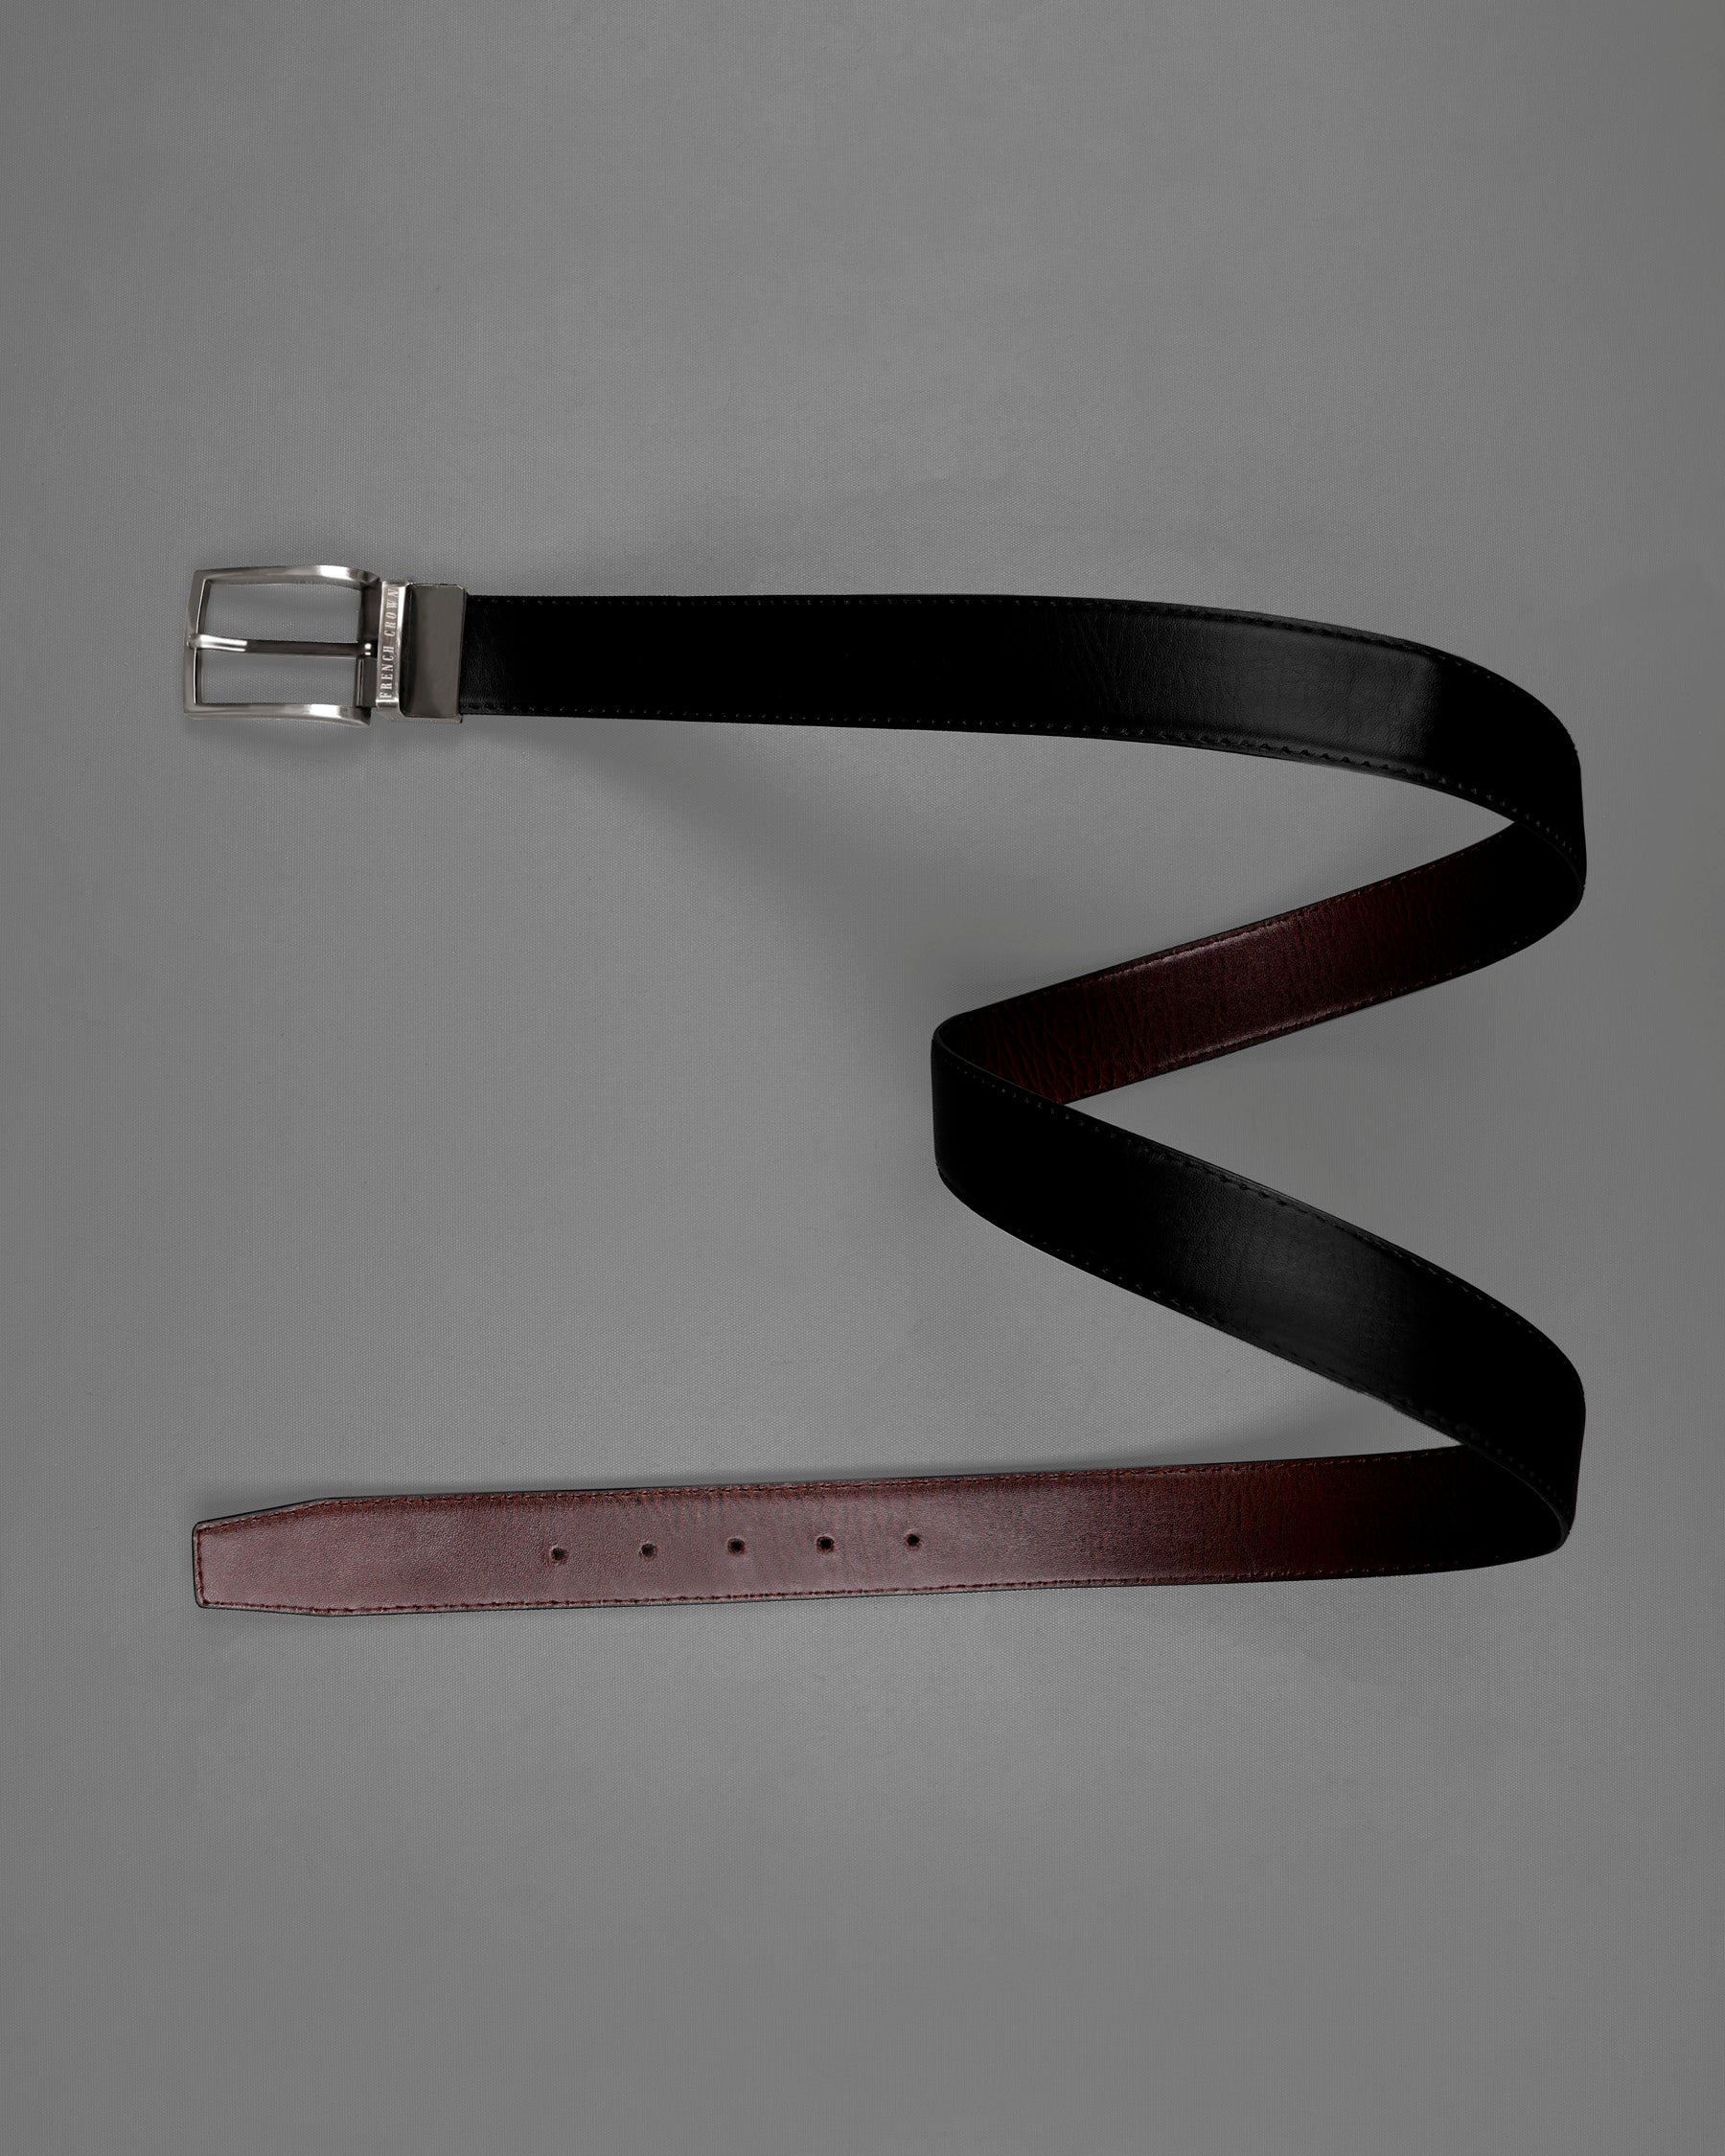 Silver Metallic Shiny Buckle with Jade Black and Brown Leather Free Handcrafted Reversible Belt BT076-28, BT076-30, BT076-32, BT076-34, BT076-36, BT076-38